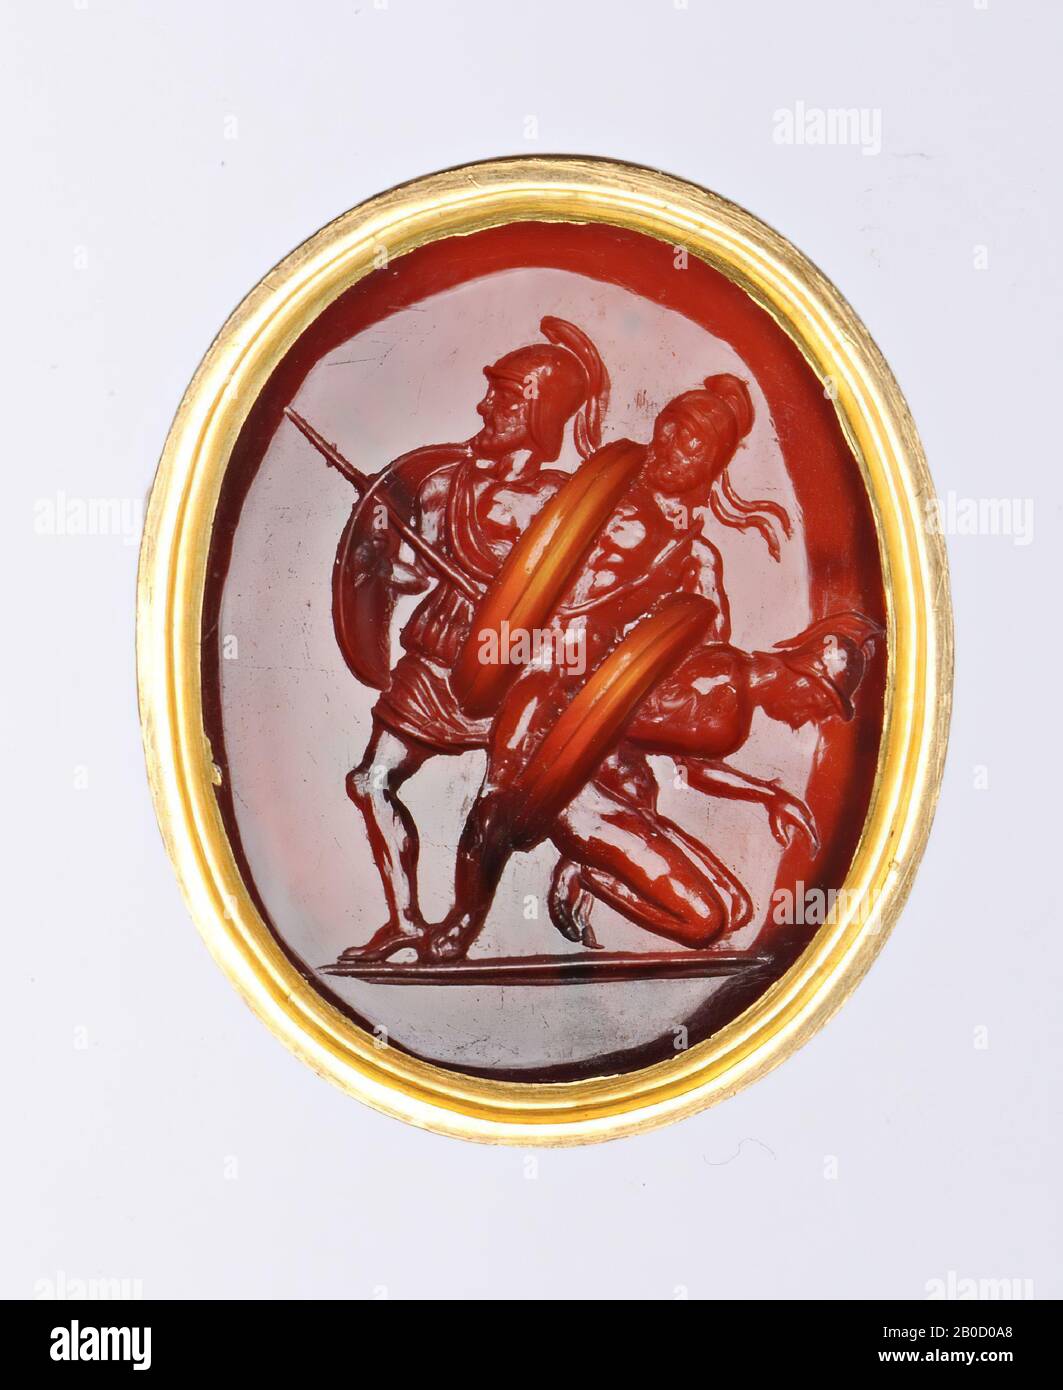 Vz: 3 warriors in a row, the left figure kneeling to the left with a bowed head and shield on back, middle figure standing to the right in receding posture, hiding behind his shield, the right figure attacking to the right with spear and shield, gem, intaglio, carnelian, Color: red-brown, Shape: oval, standing, Processing: in gold ring, Type :, 25 x 19 mm, D. 4 mm, wt. 9.43 gr., 18th century 1700-1800 Stock Photo